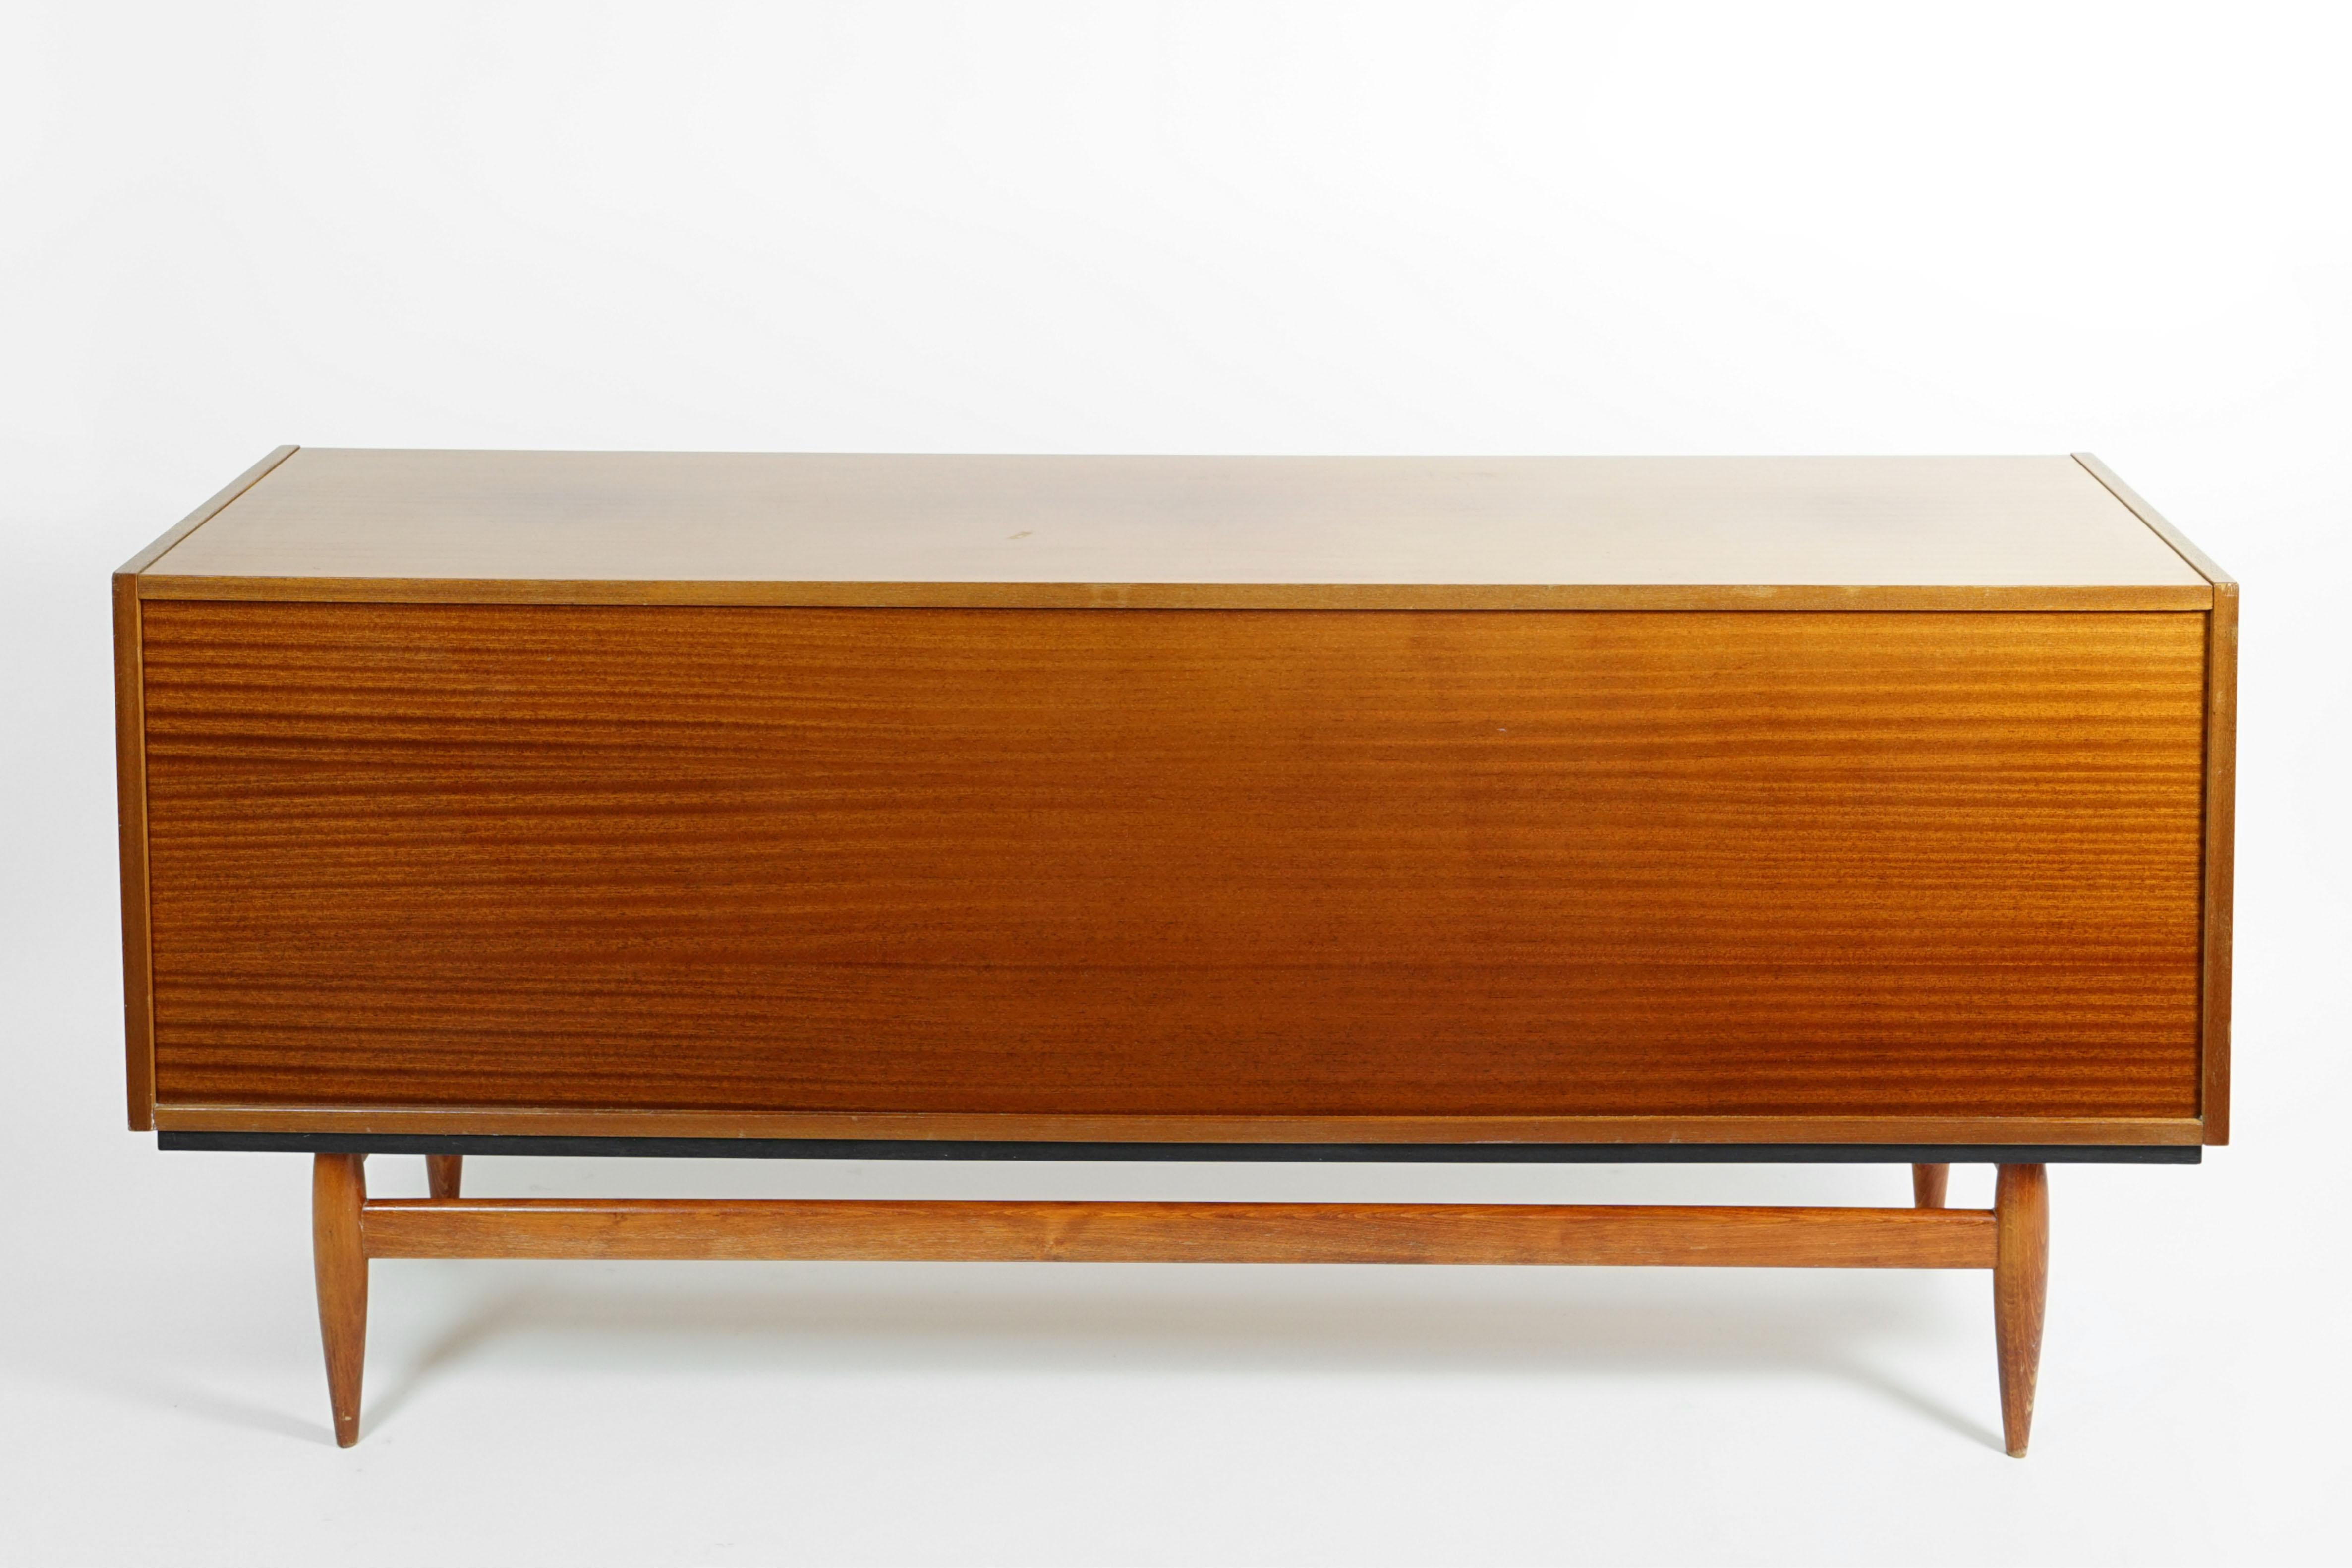 Elegant Sideboard of designer Miroslav Navratil for ULUV, 1960s in former Czechoslovakia.

This rare vintage piece is made of mahogany with a shiny lacquer finish and round brass colored handles.